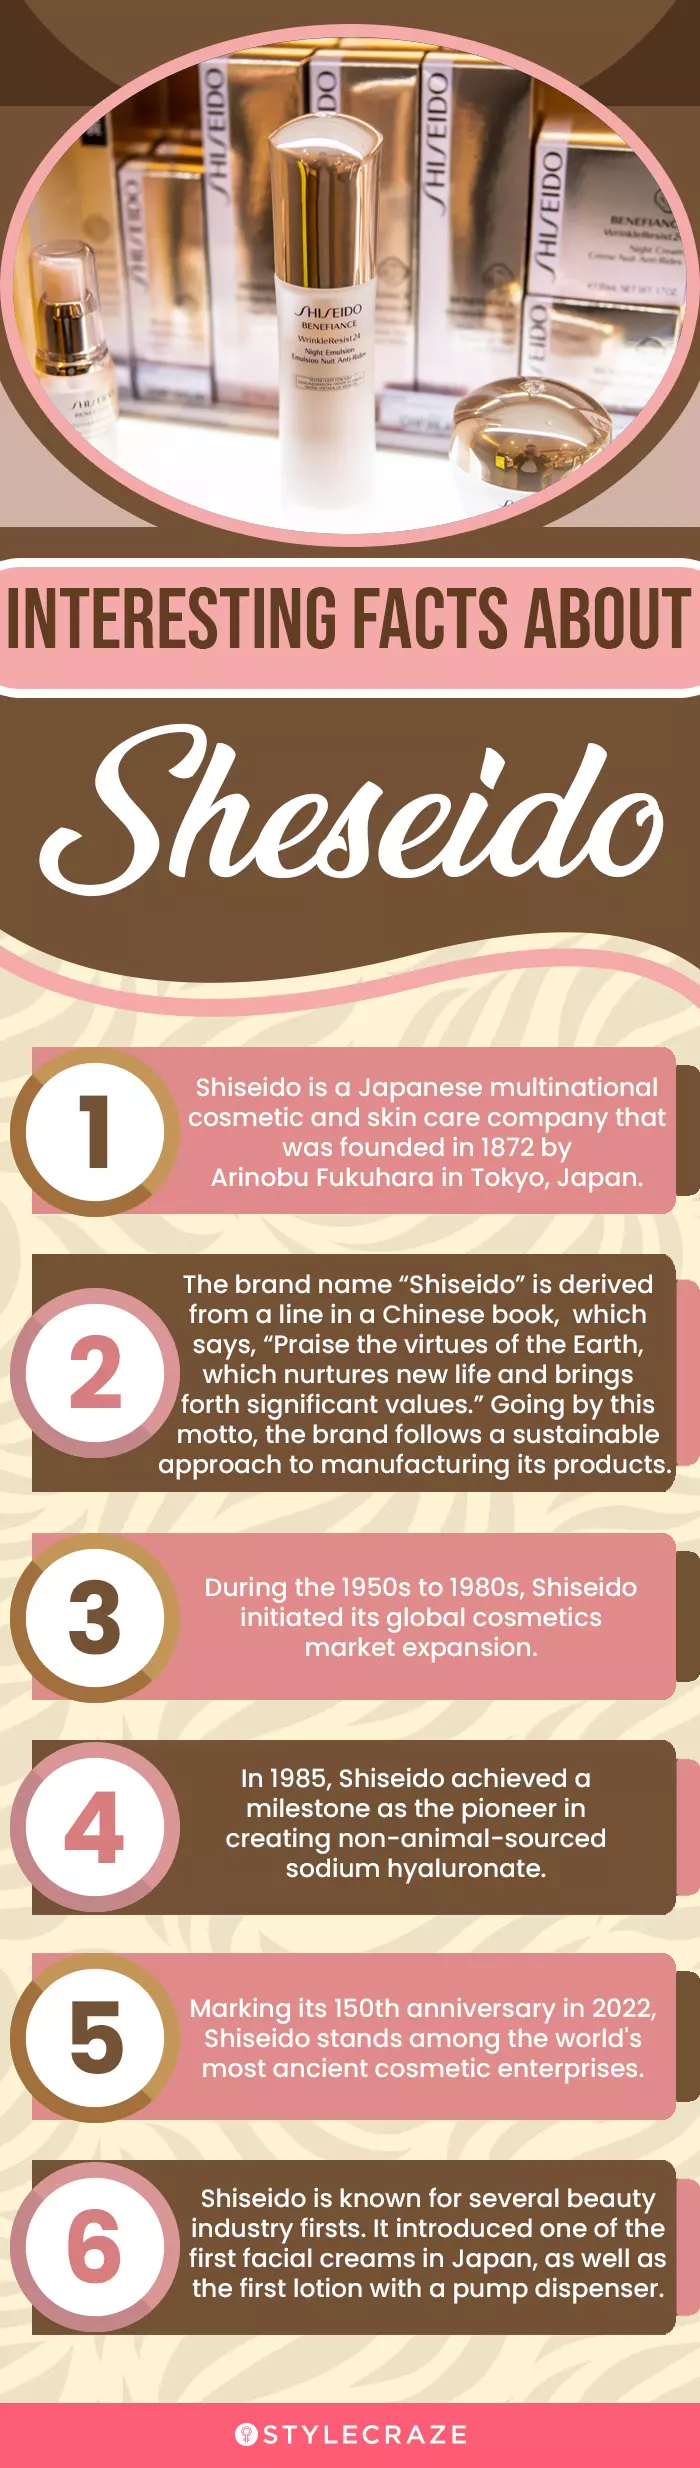 Interesting Facts About Sheseido (infographic)